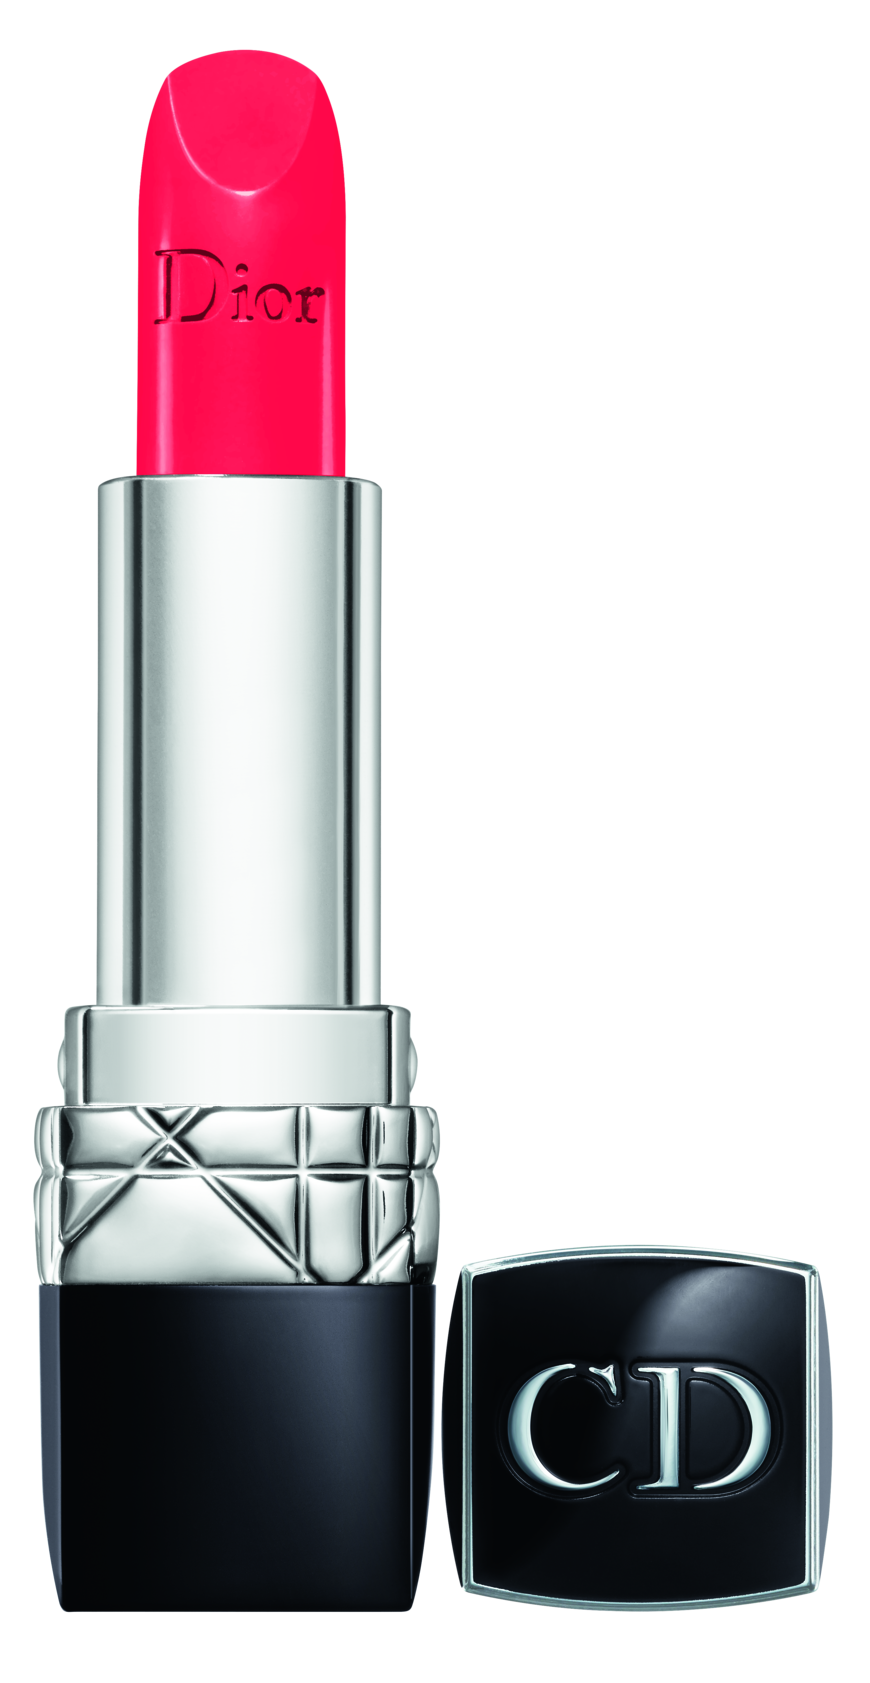 rouge-dior-667